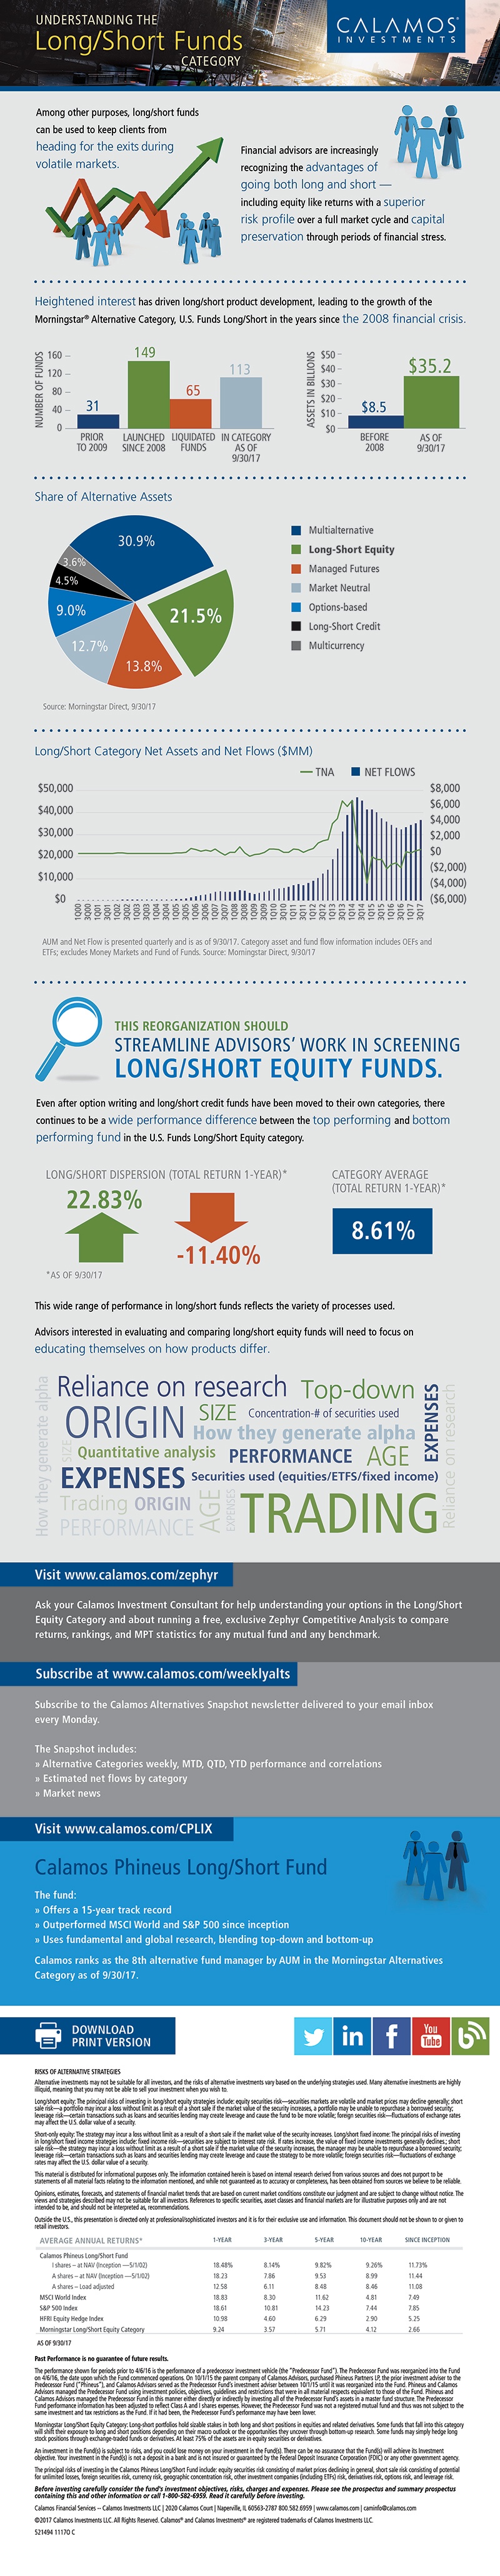 Understanding The Long Short Funds Category Infographic